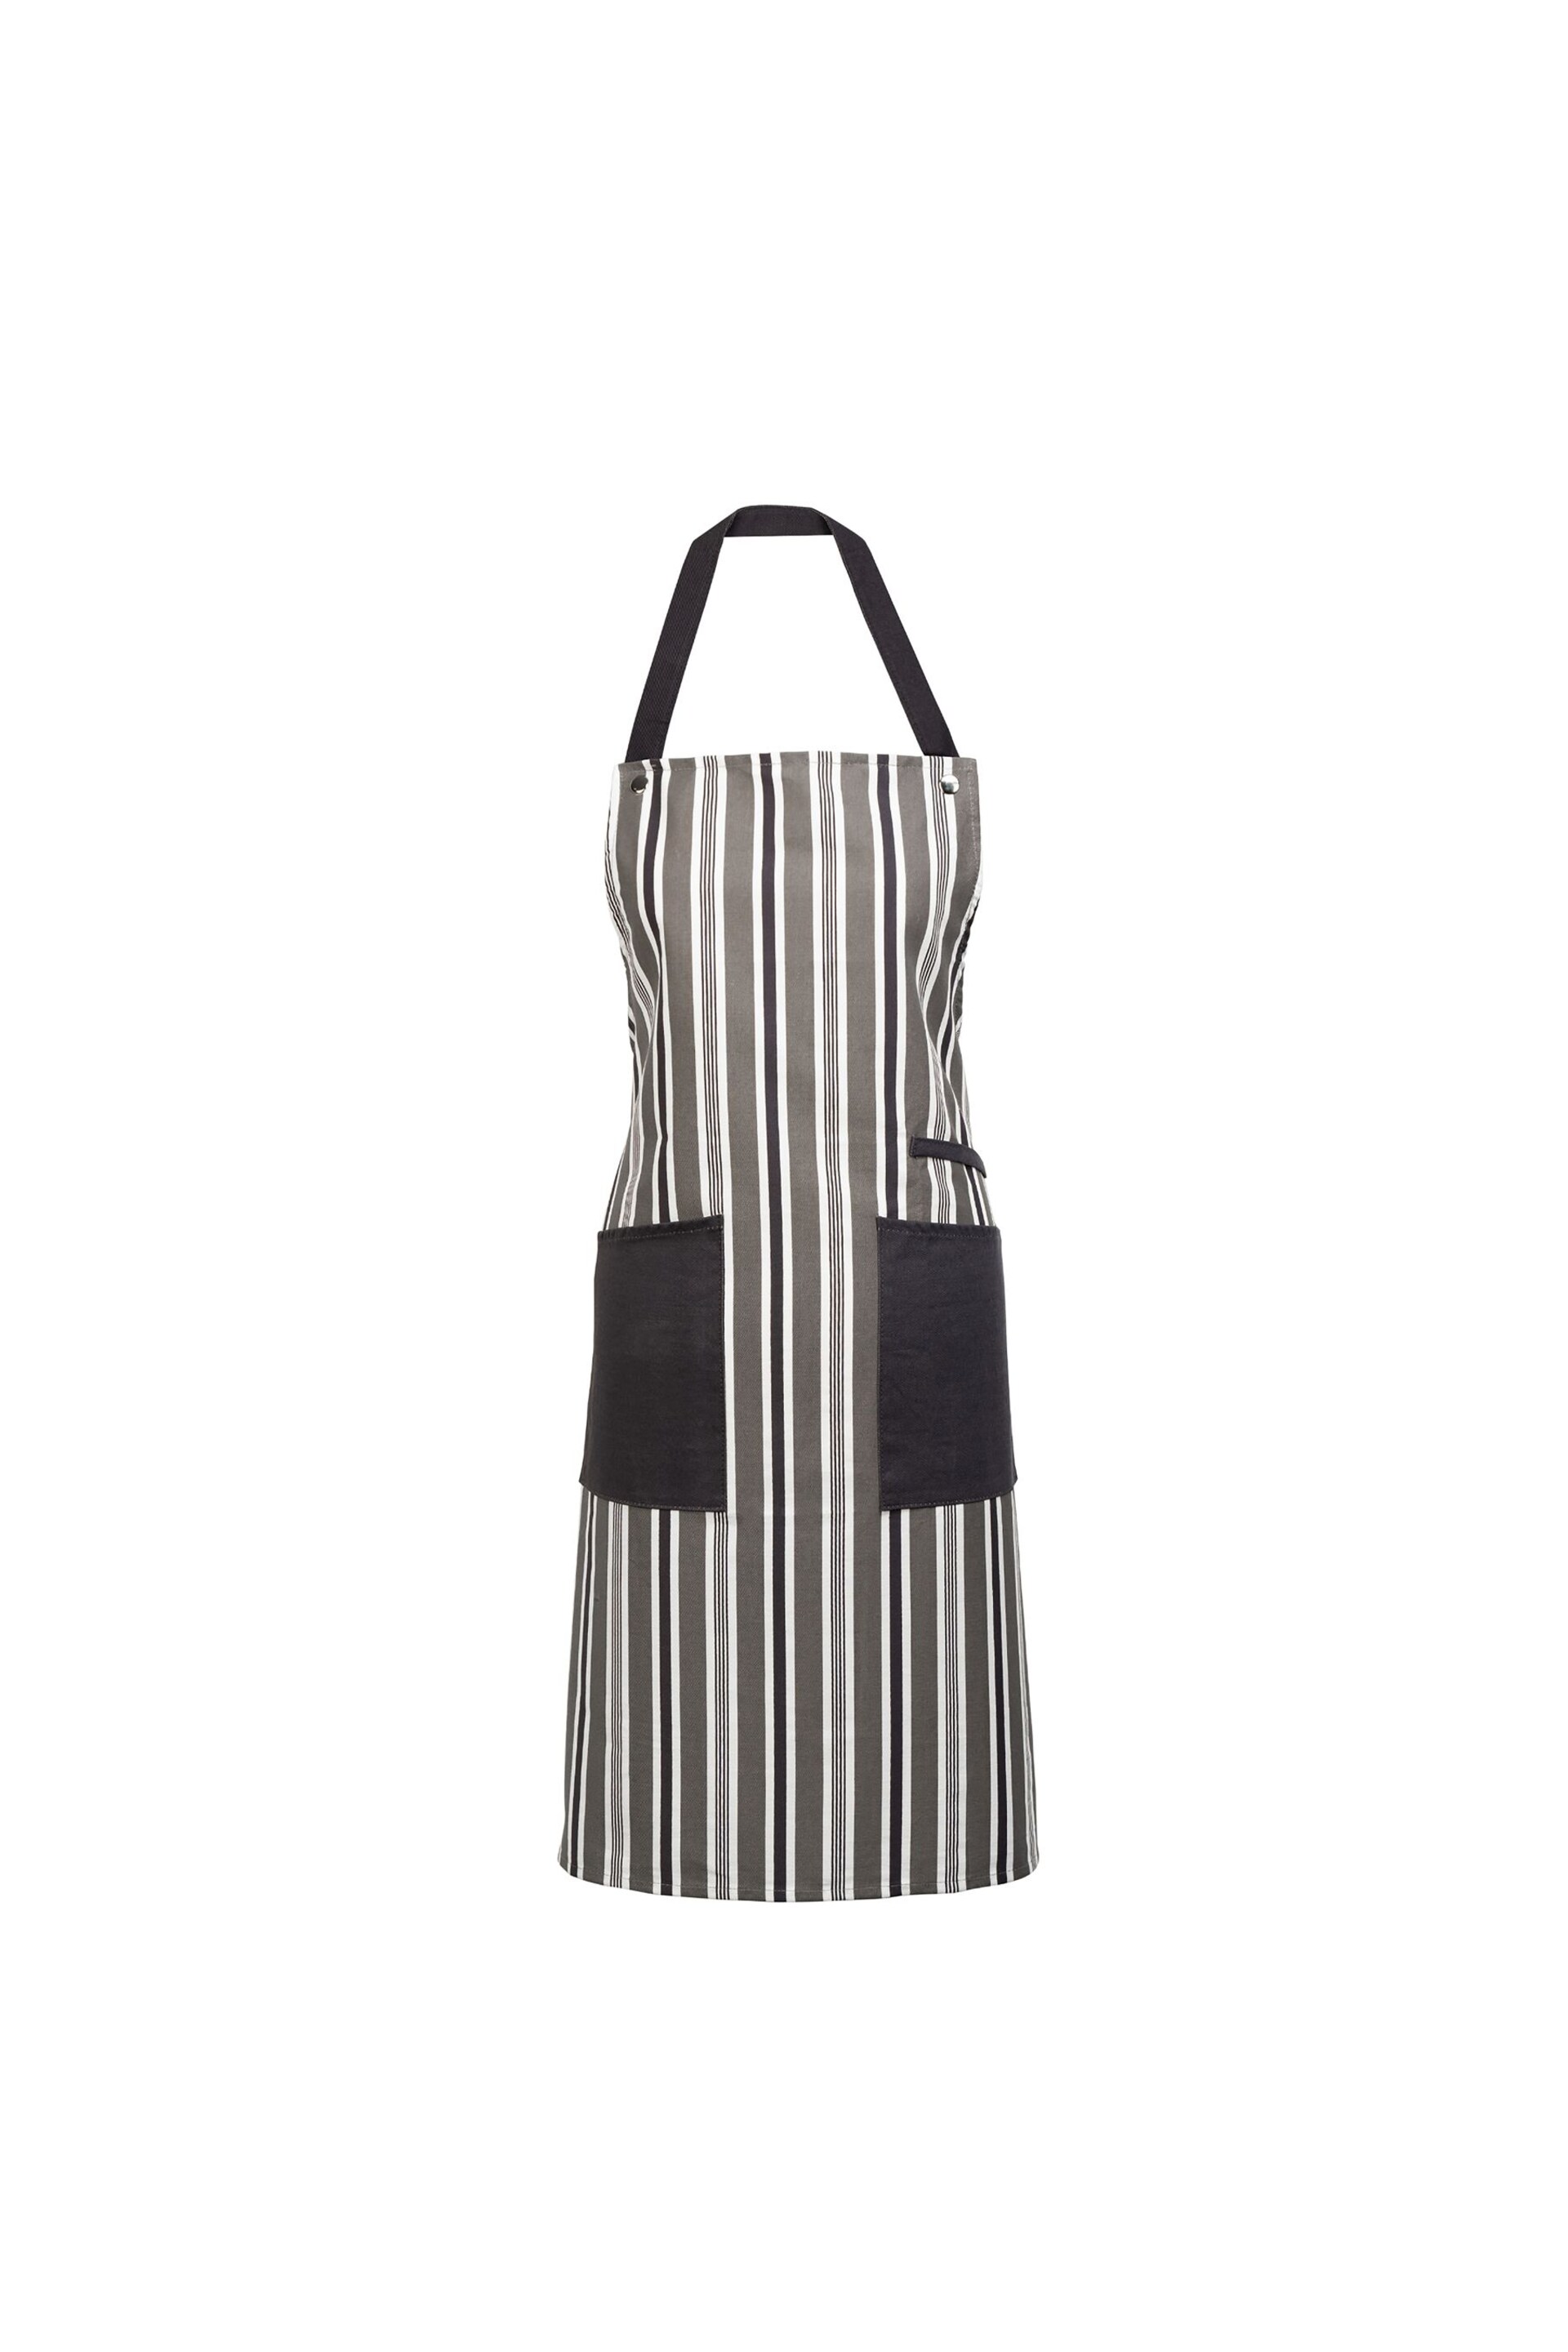 Luxe Cotton Apron - Image 3 of 4